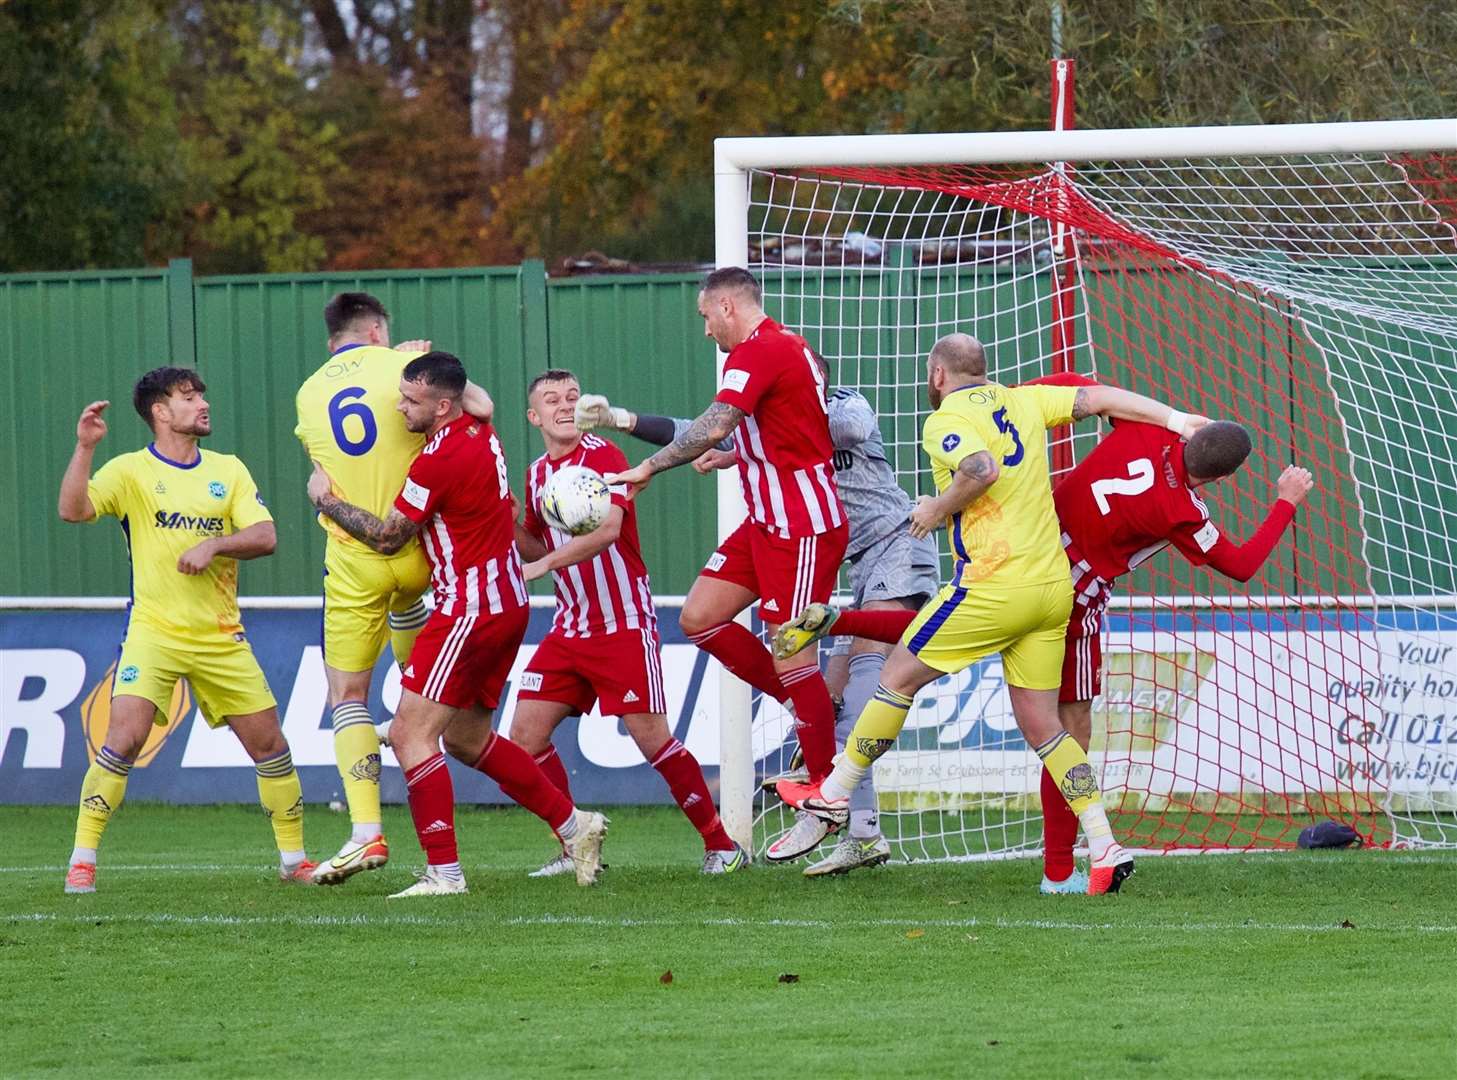 Buckie put Formartine under pressure during Saturday’s 2-1 Highland League win at North Lodge Park. Picture: Phil Harman